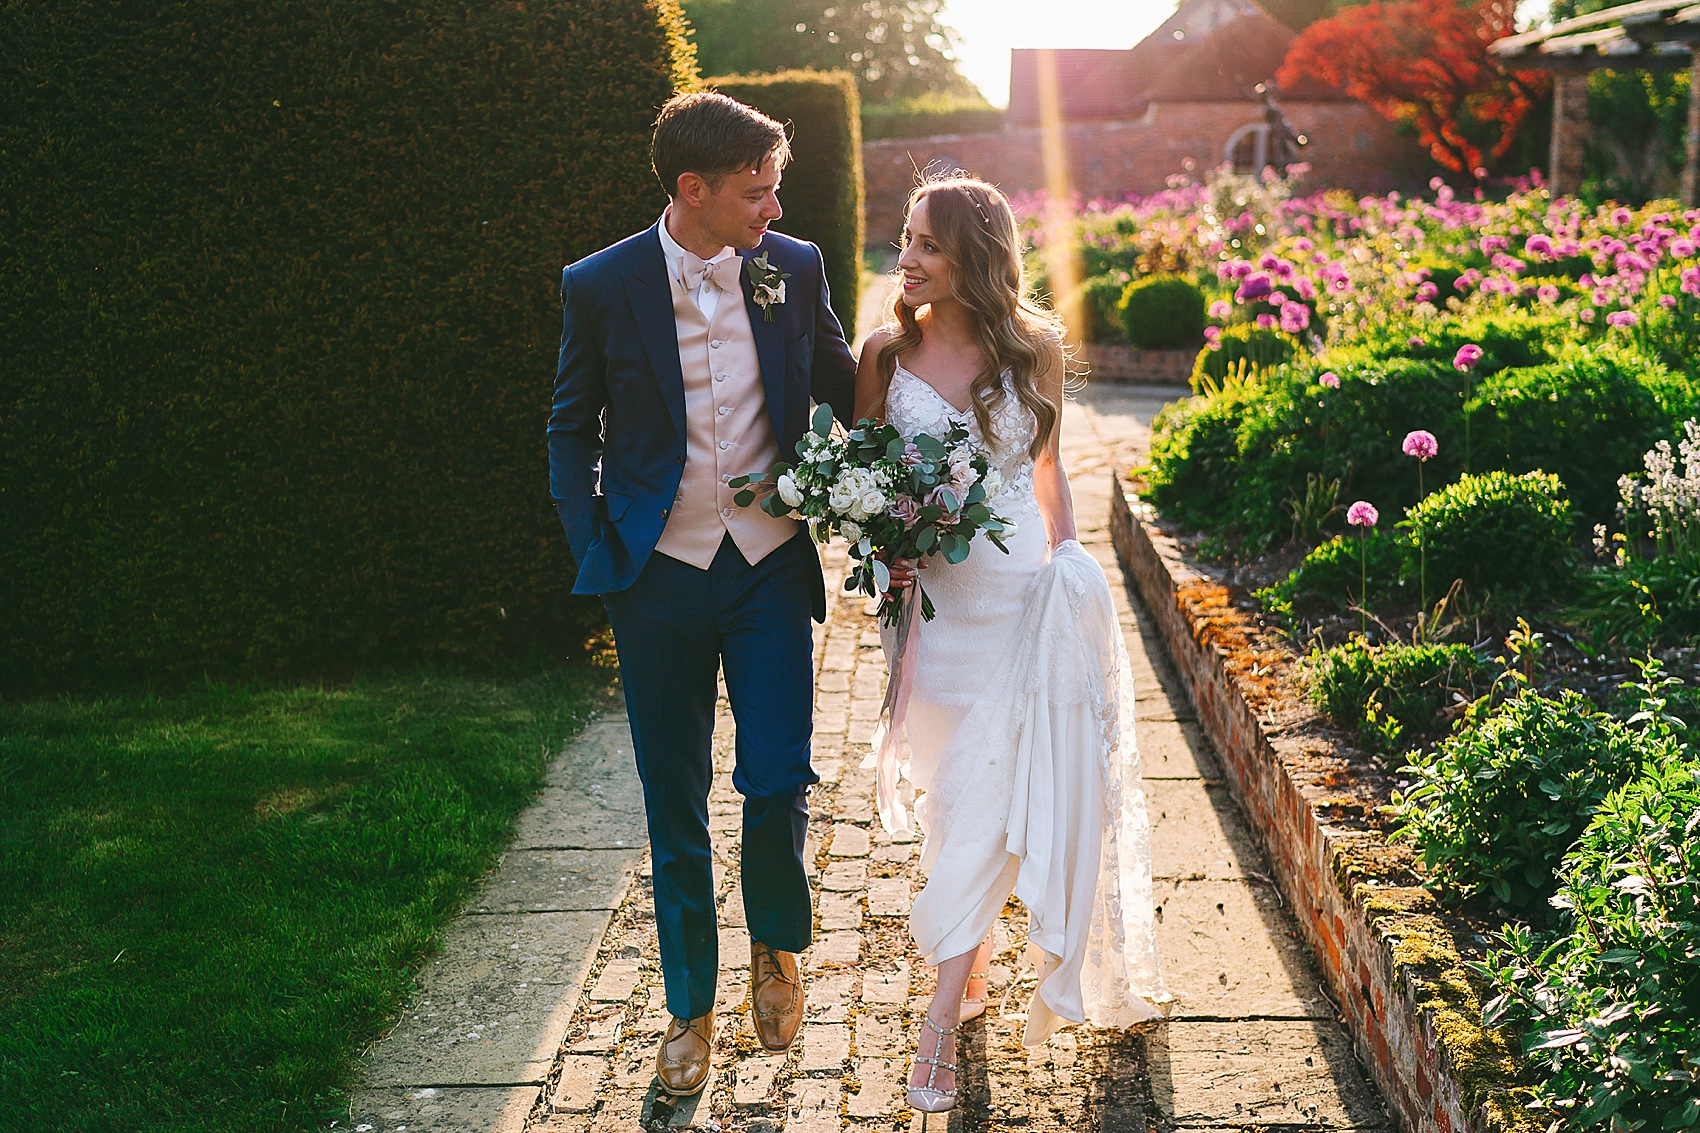 Sienna von Hildemar dress romantic country house wedding  - A Sienna Von Hildemar Dress + Celestial Headpiece for a Romantic Wiltshire Country House Wedding